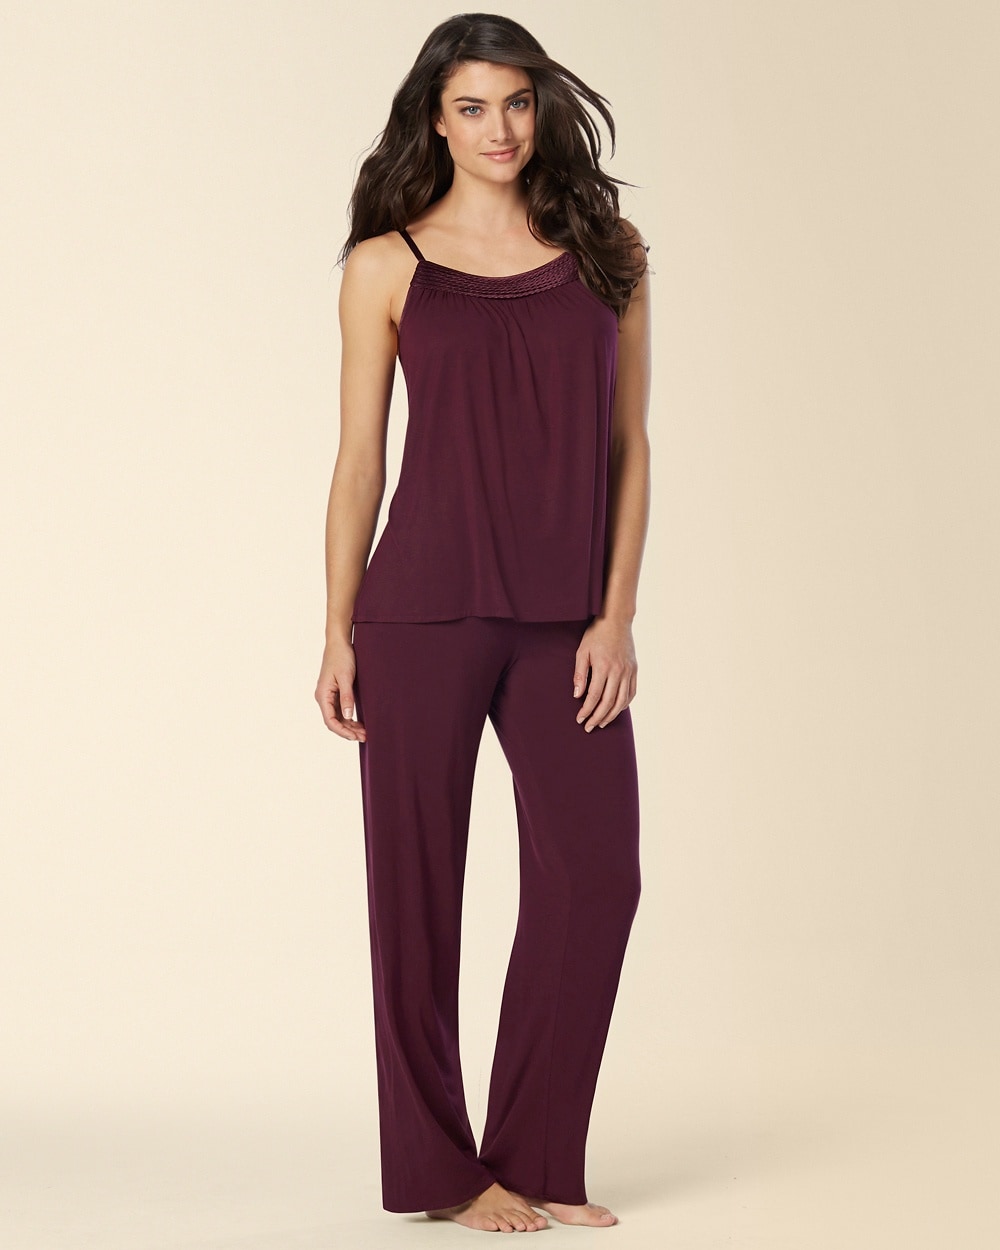 Midnight By Carole Hochman Looking for Love Pajama Pant Set Plum